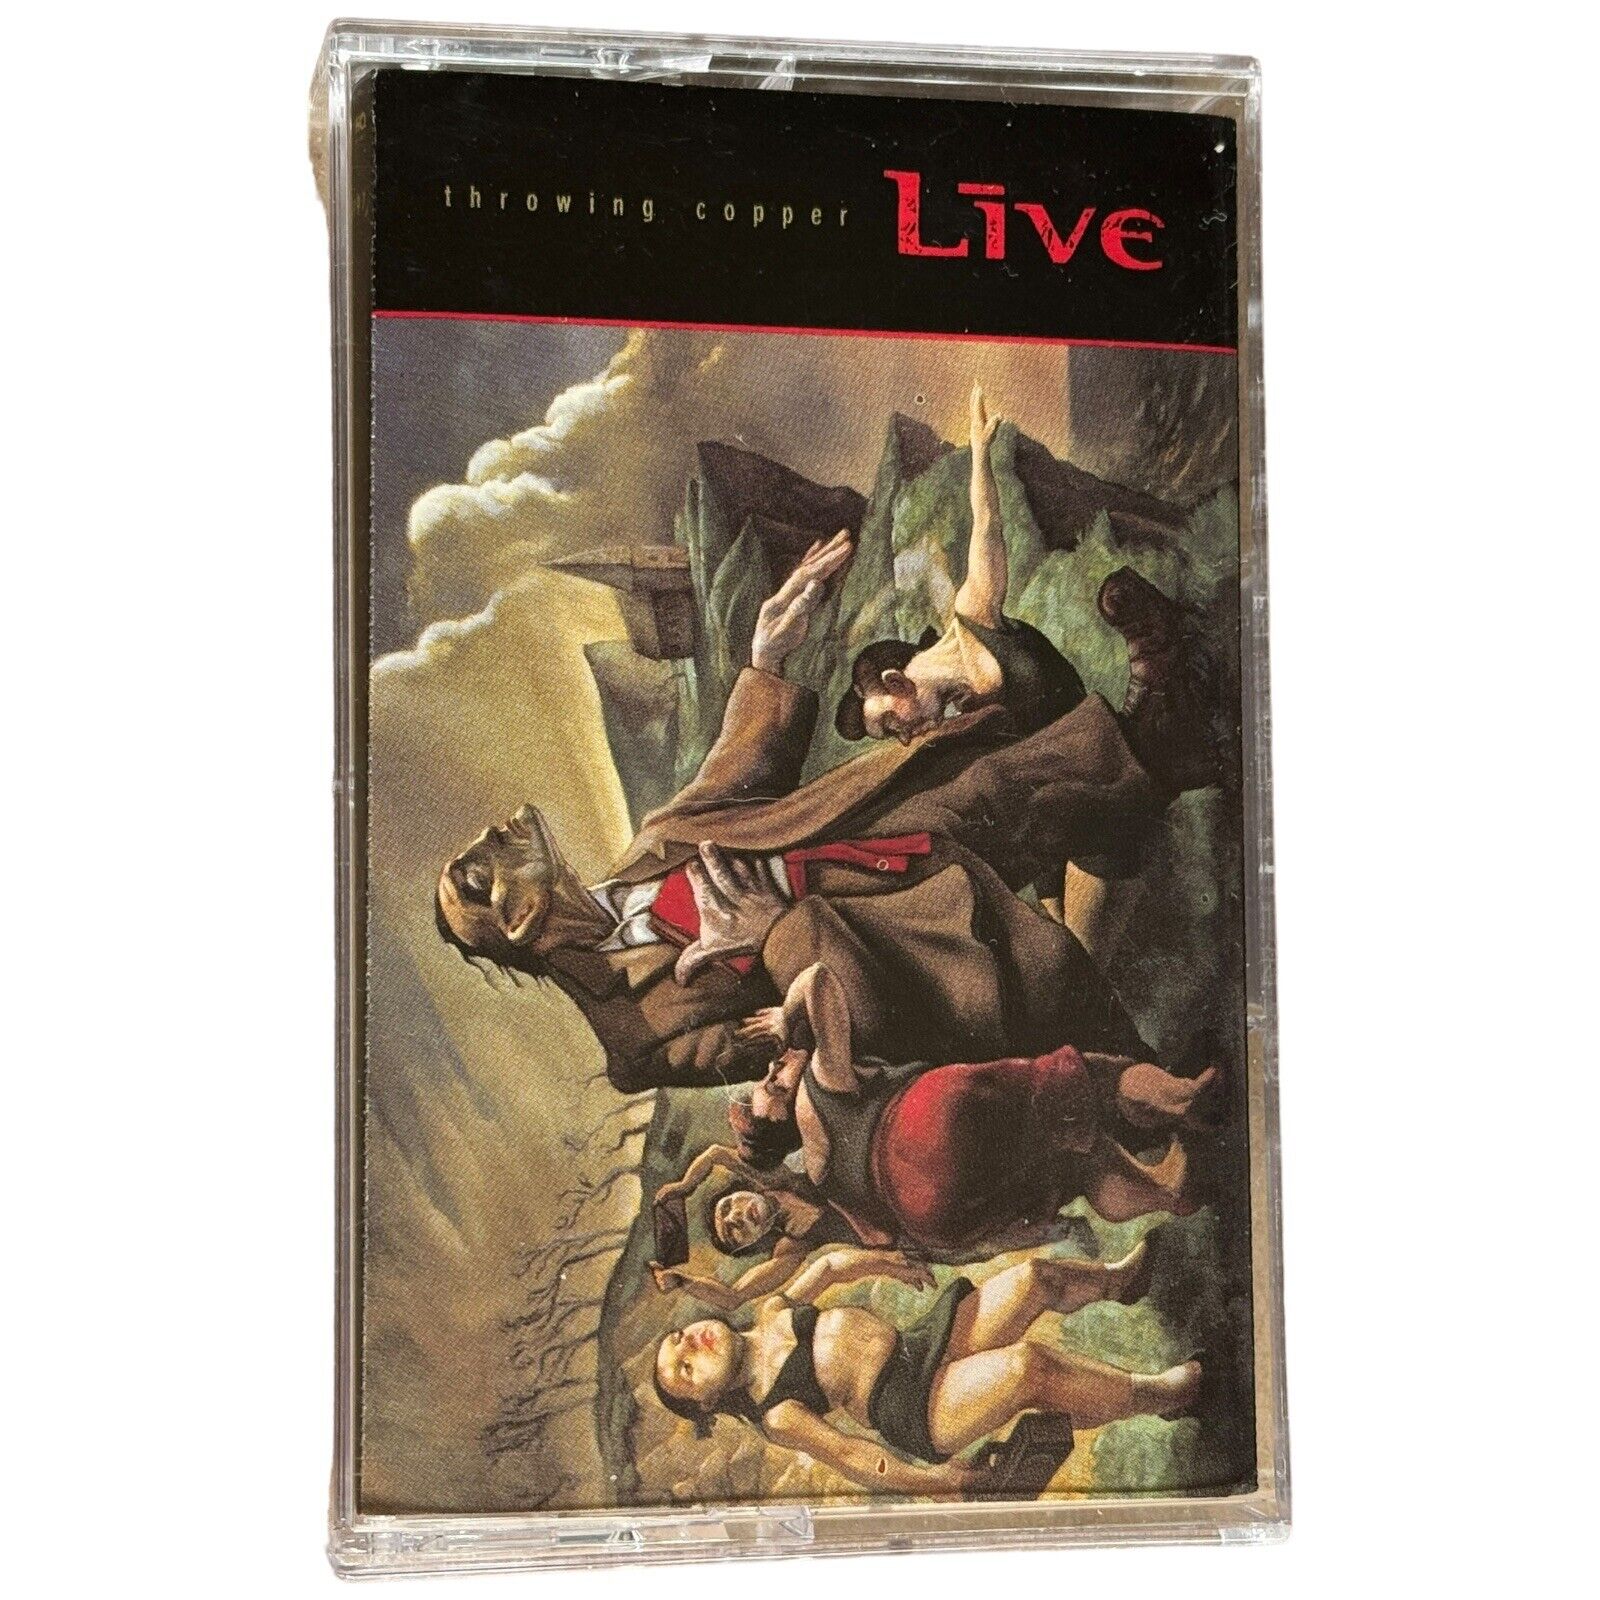 Vtg Throwing Copper by Live Cassette Tape 1994 Radioactive Records 90s Music